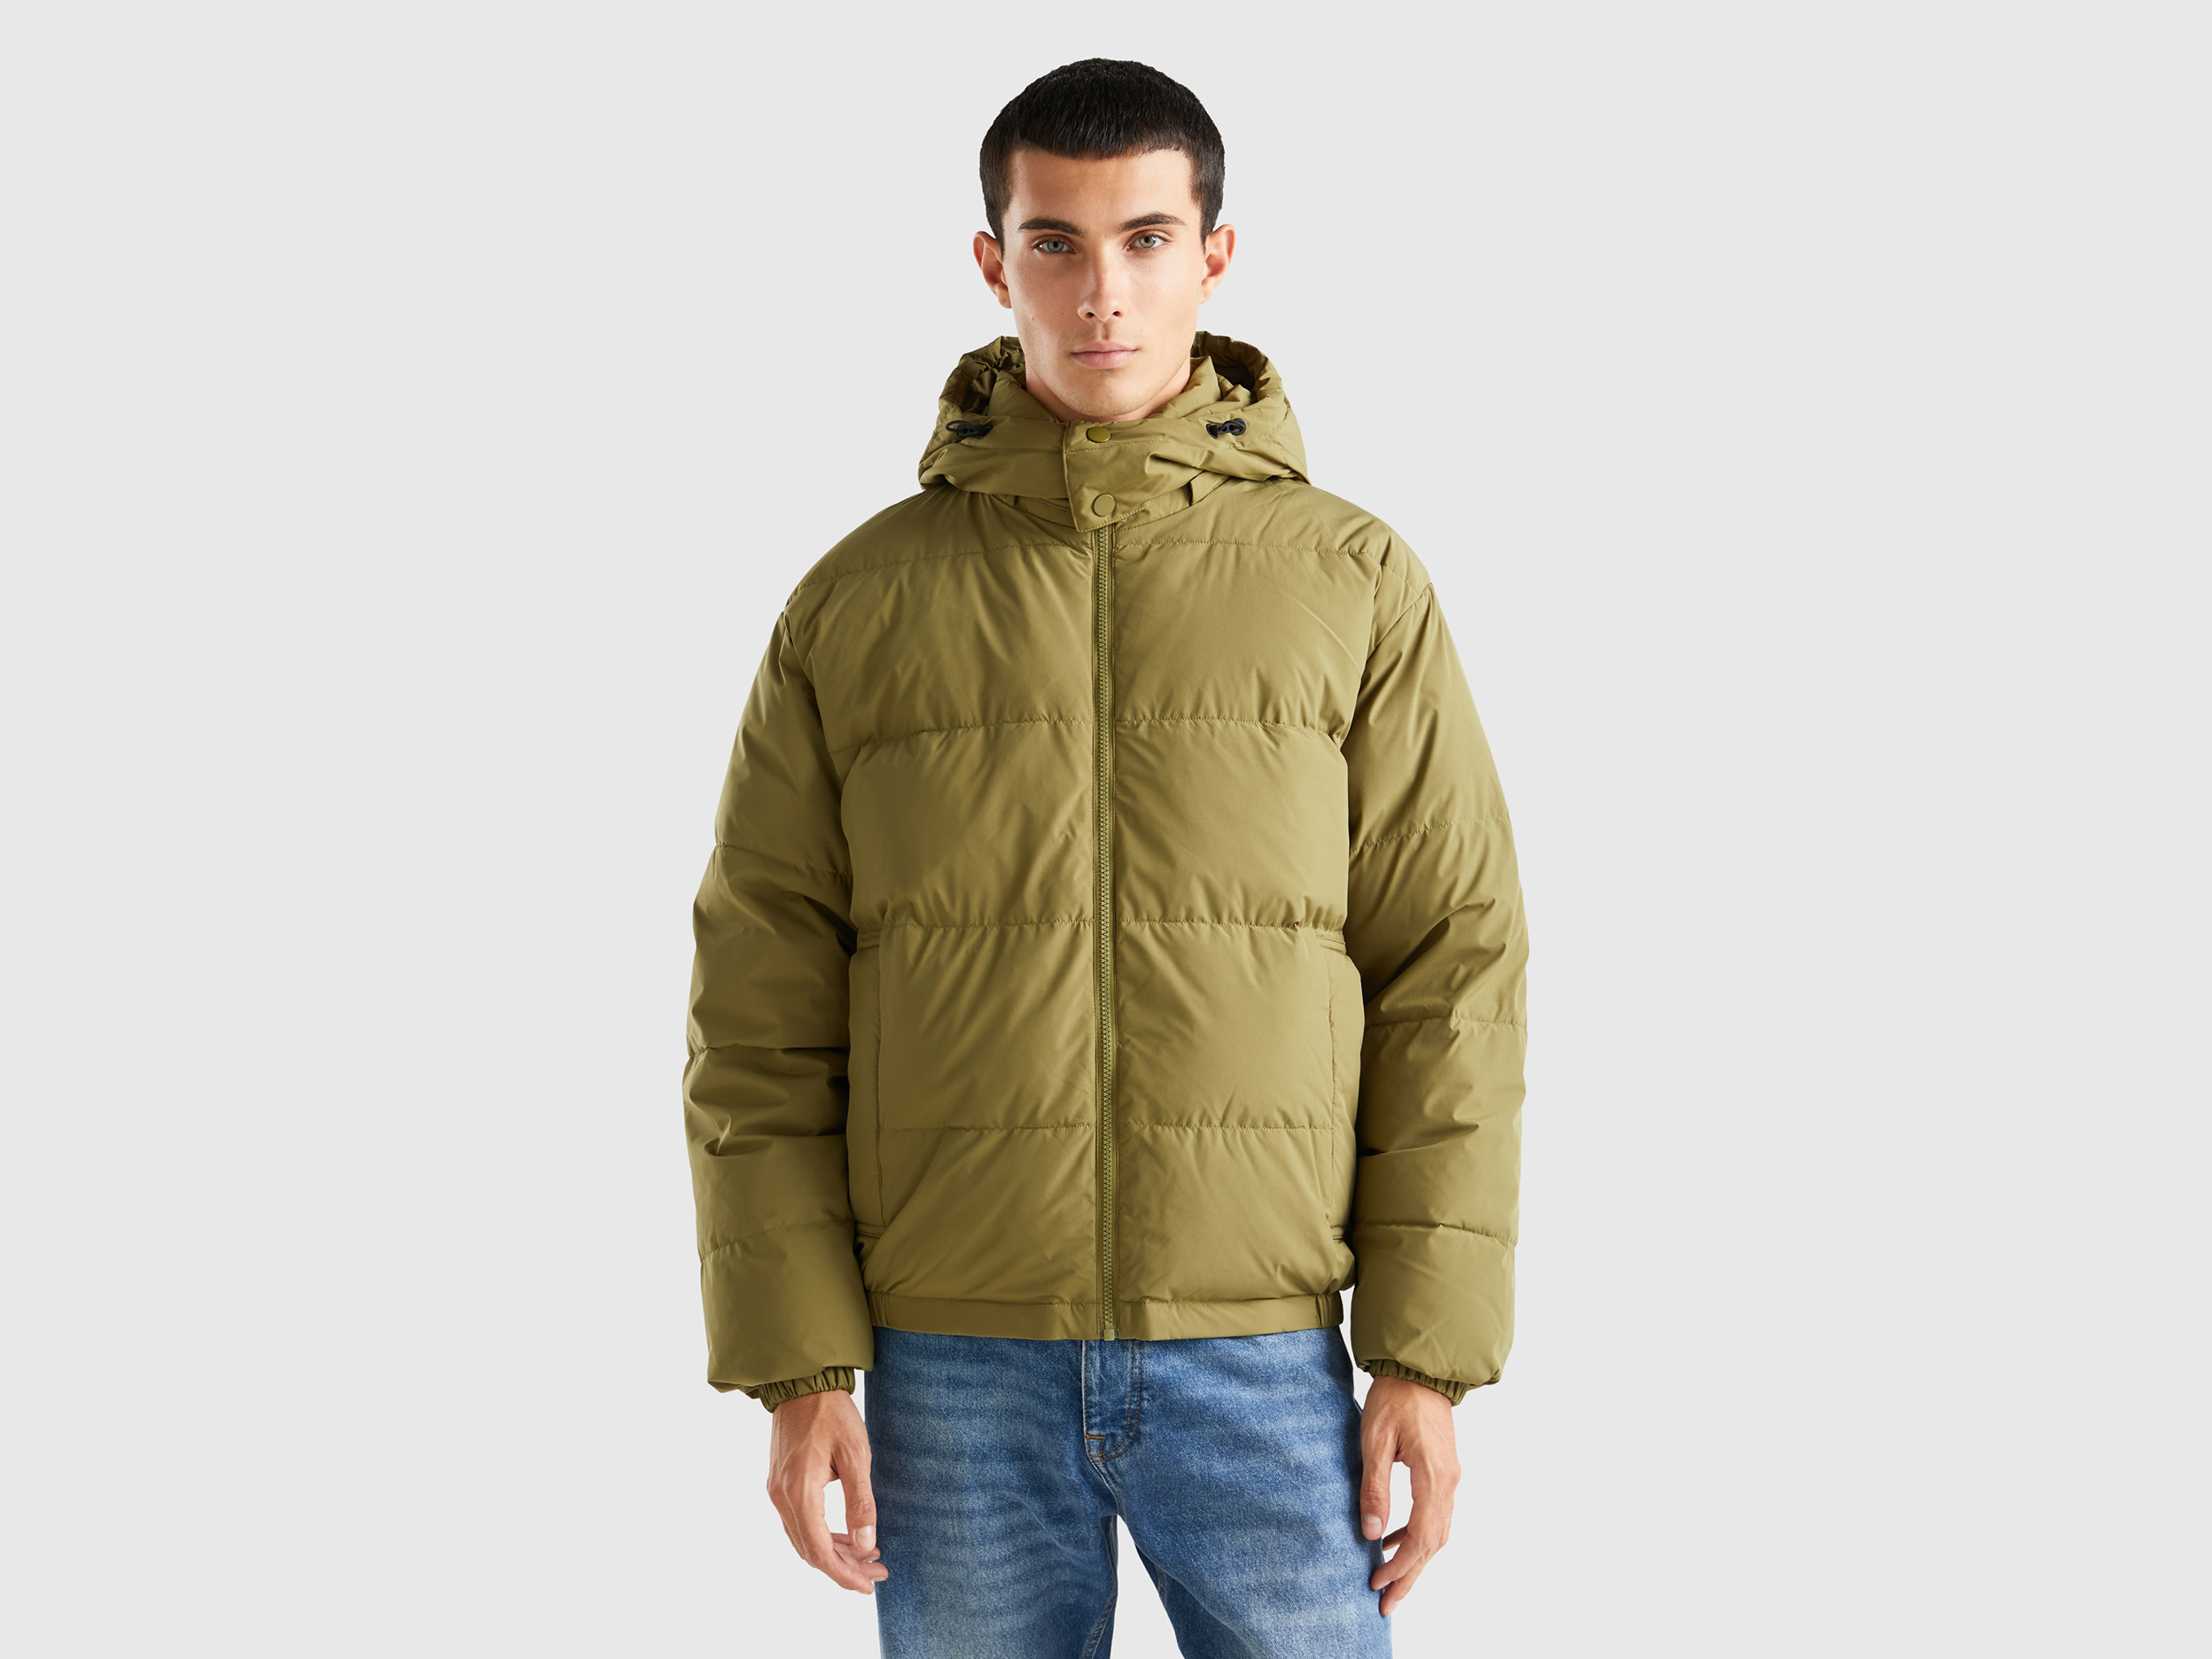 Benetton, Padded Jacket With Removable Hood, size S, Military Green, Men